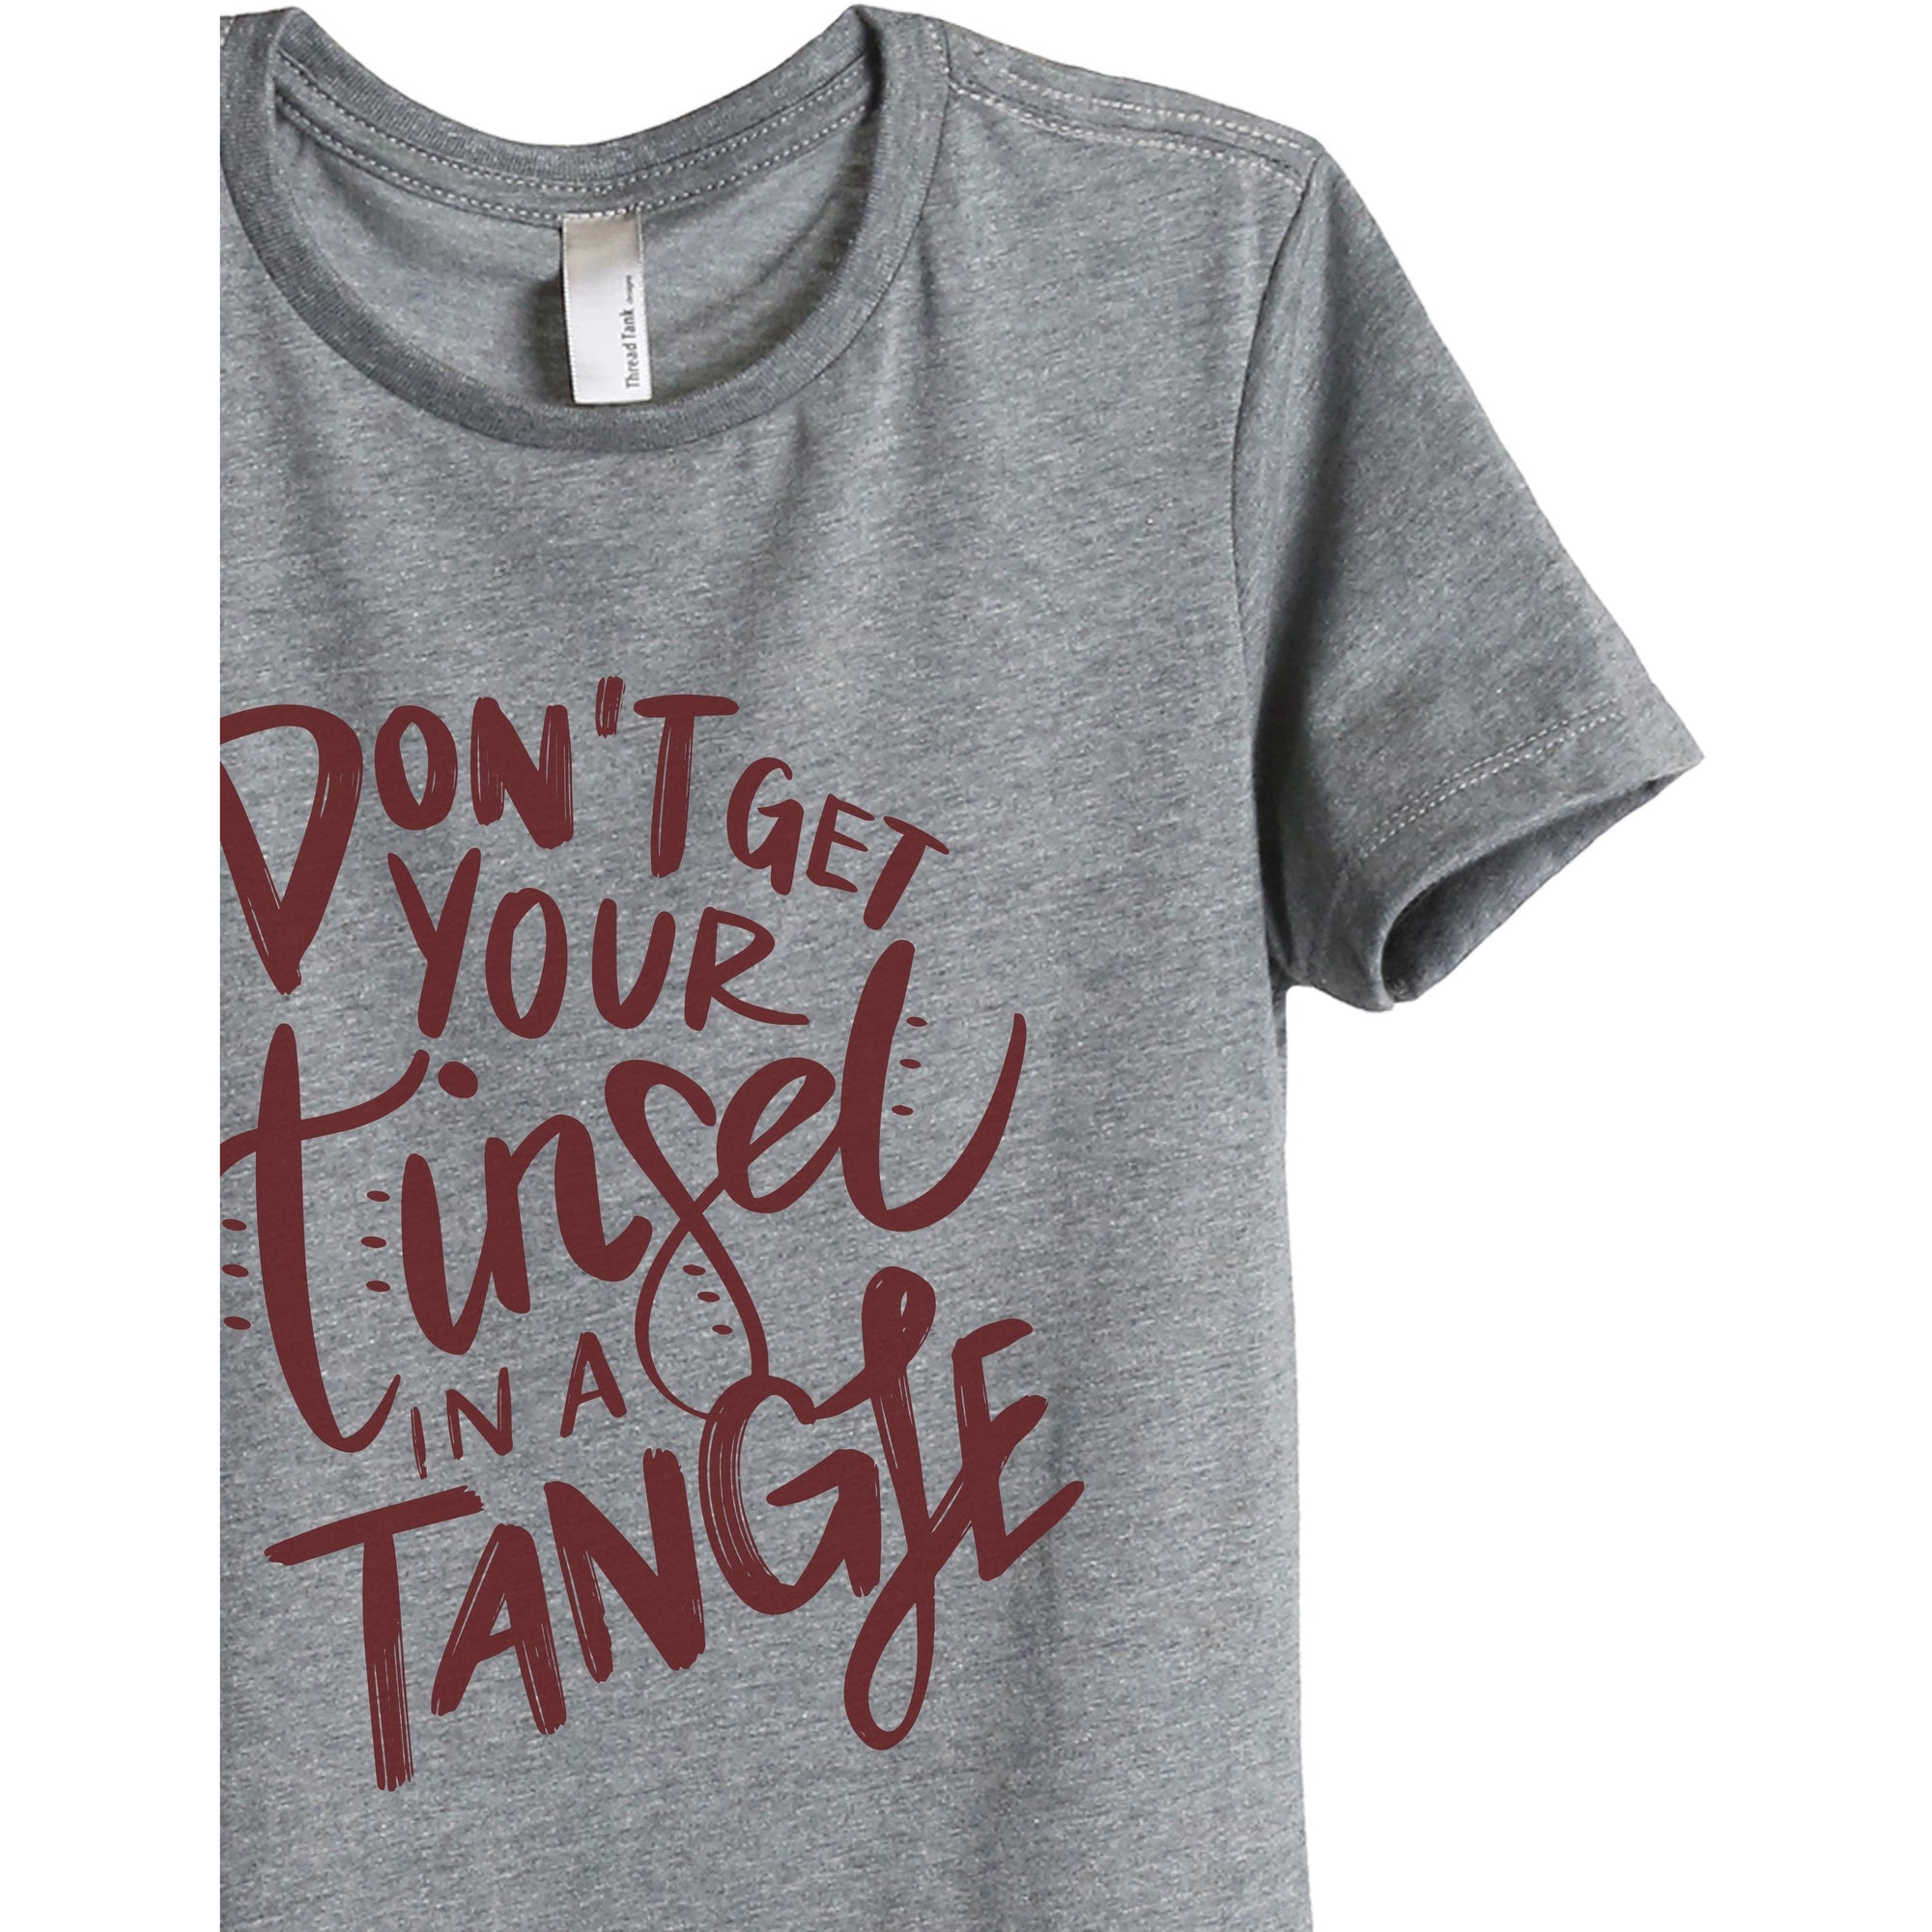 Don't Get Your Tinsel In A Tangle Women's Relaxed Crewneck T-Shirt Top Tee Heather Grey Scarlet Print Zoom Details